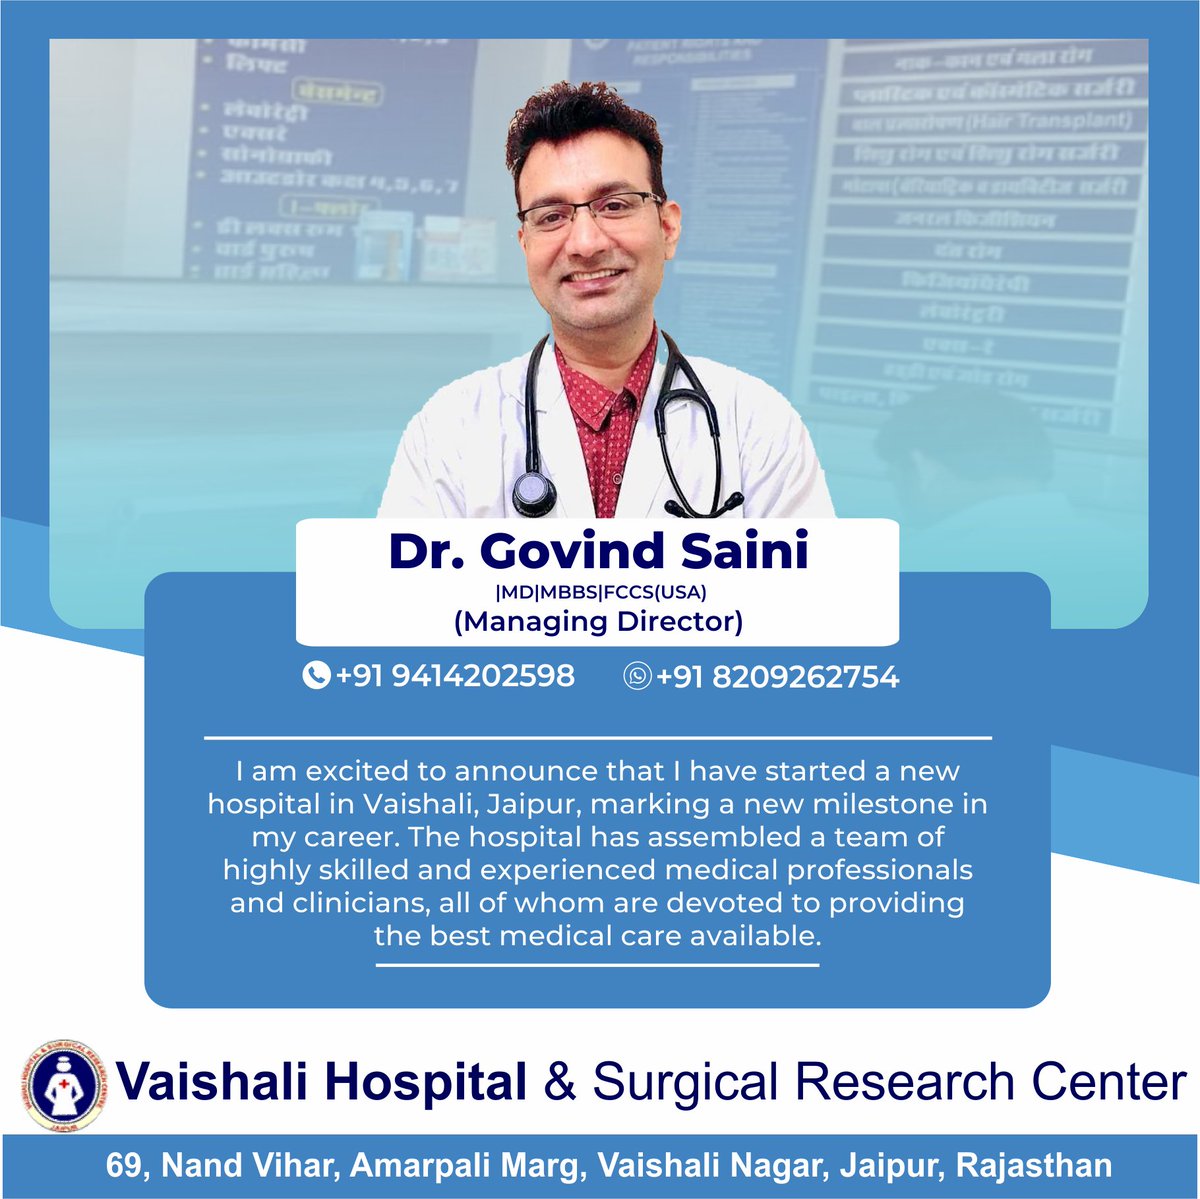 Excited to announce that I have started a #newhospital in #Vaishali, Jaipur, marking a new milestone in my career.  #drgovindsaini #physician #doctor #vaishalihospital #healthcare #VaishaliNagar #vaishalinagarjaipur #ImportantNews #GoodNews